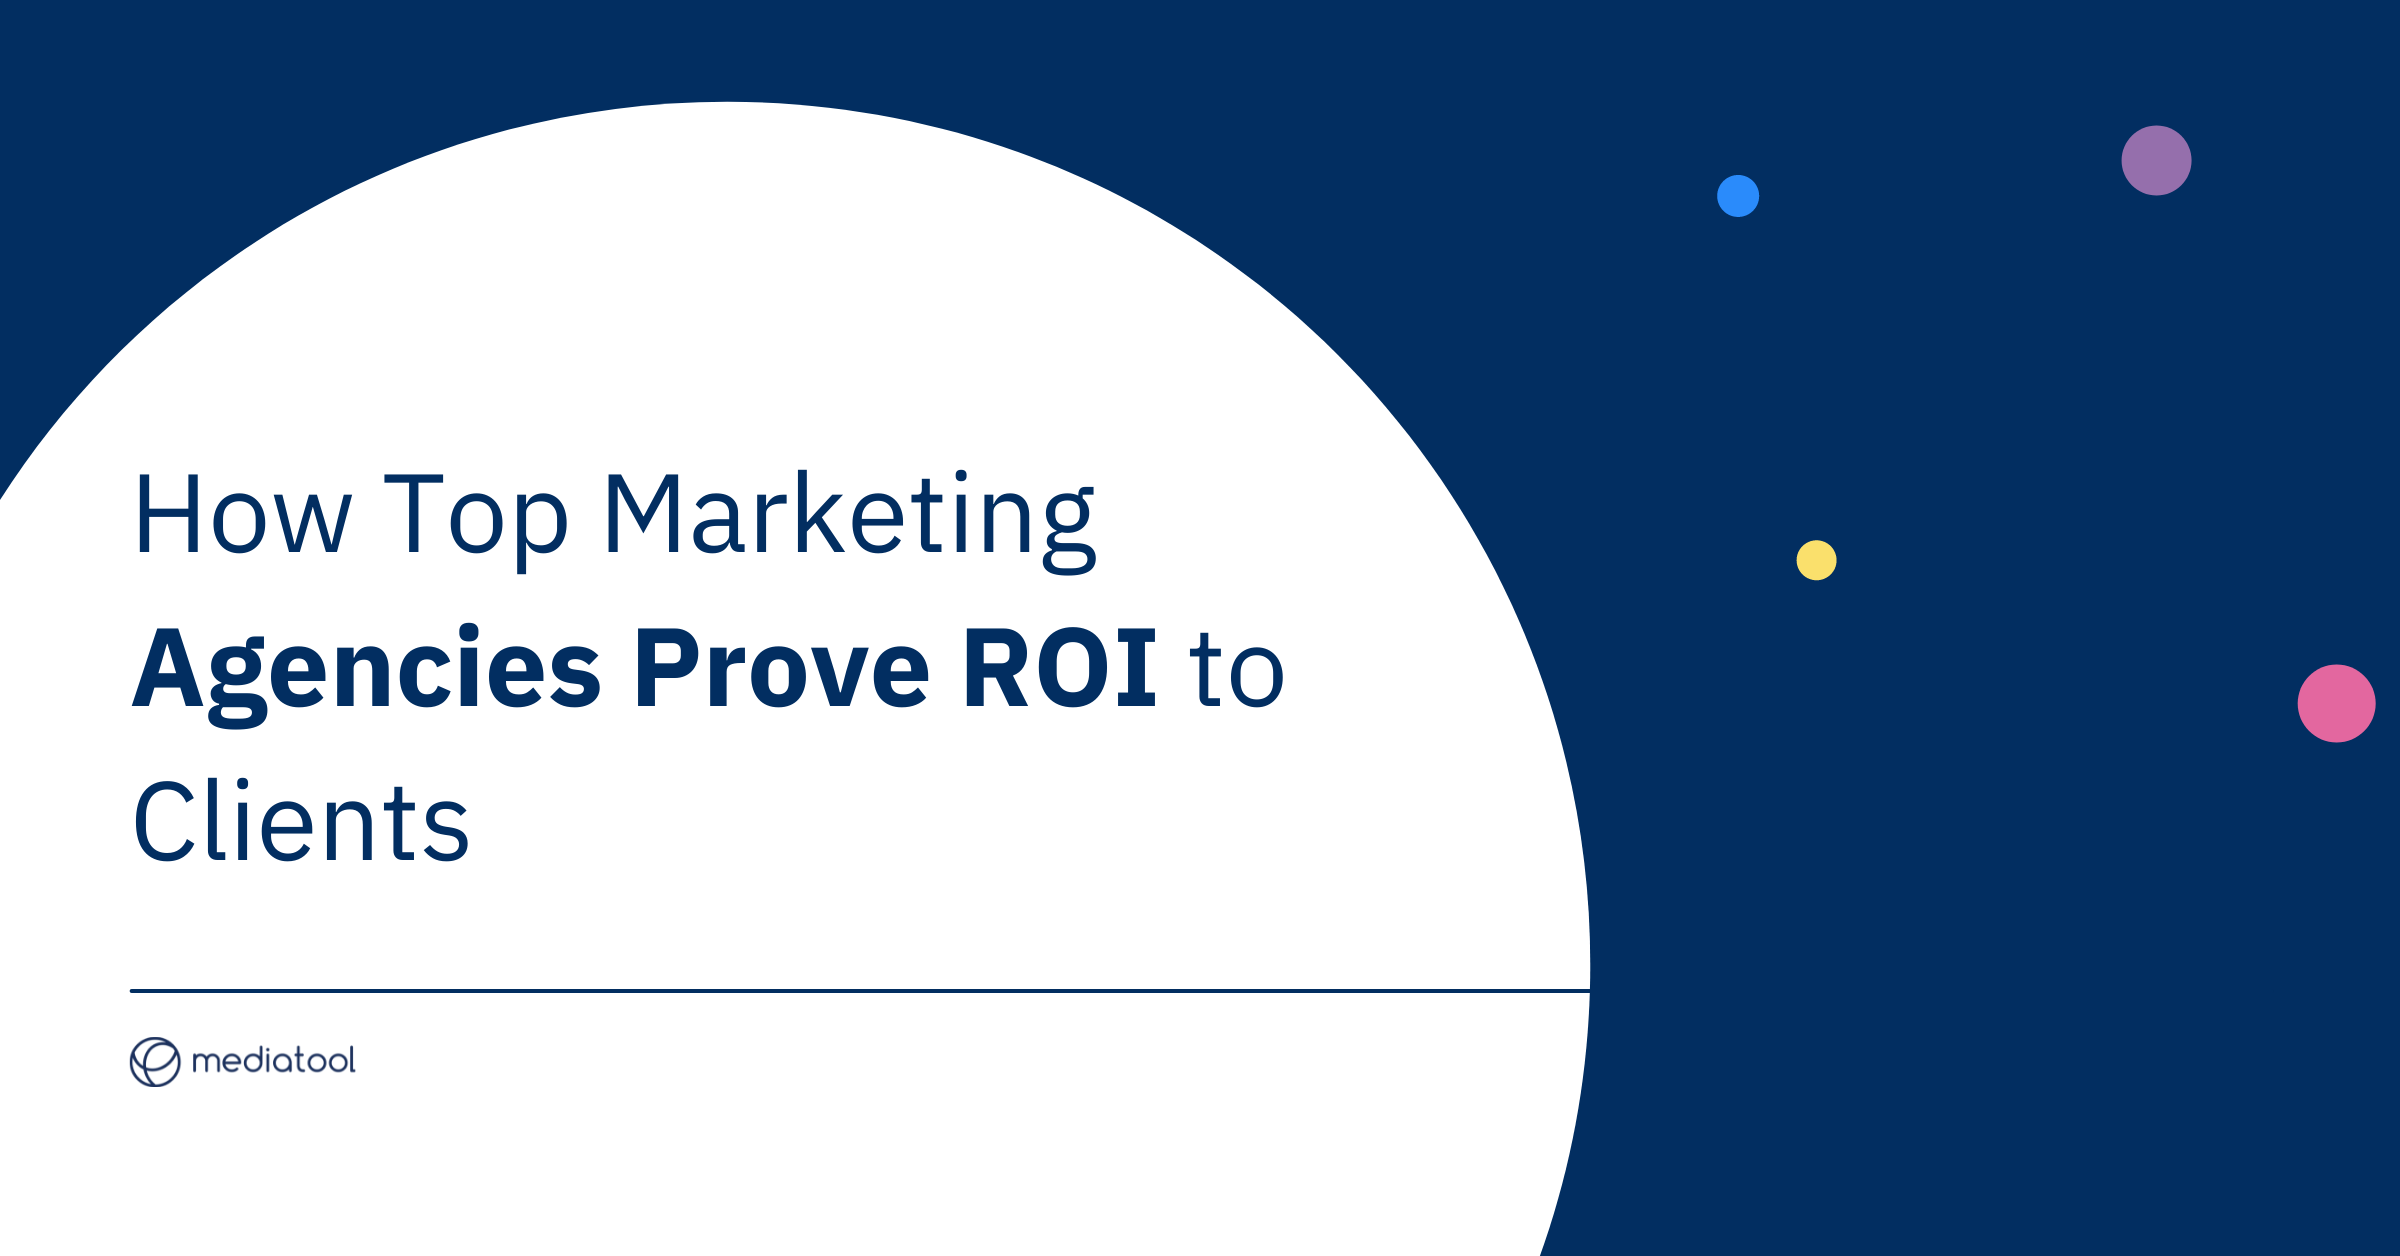 How Top Marketing Agencies Prove ROI to Clients